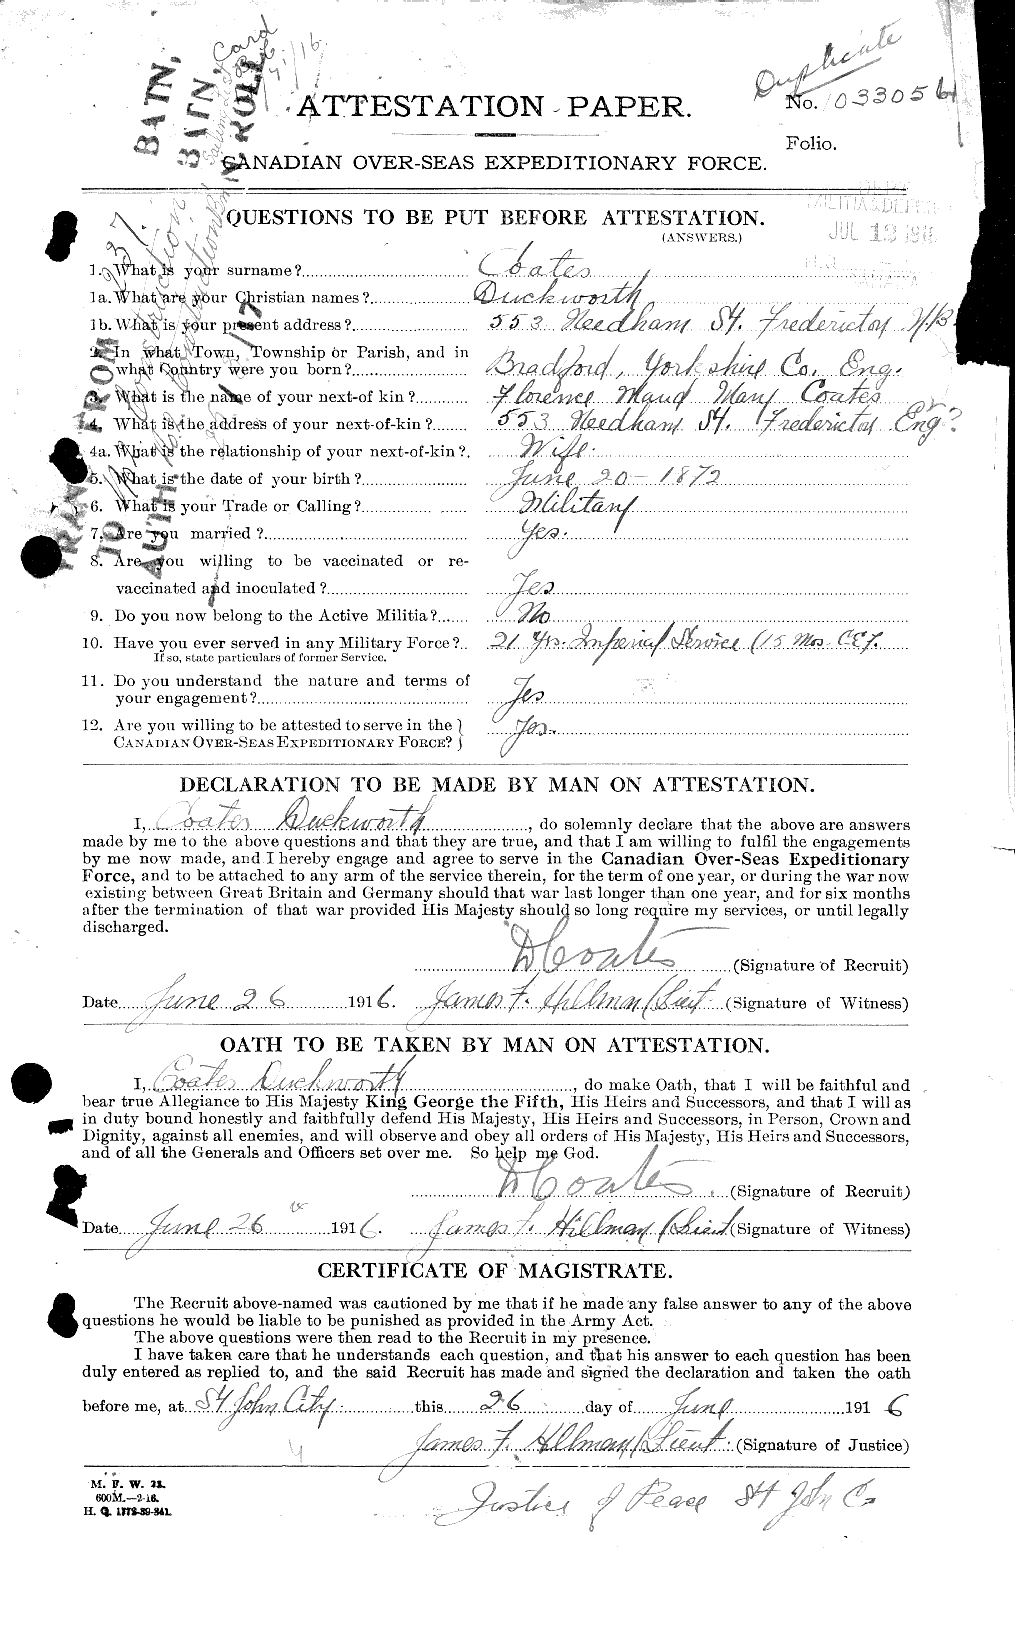 Personnel Records of the First World War - CEF 025610a